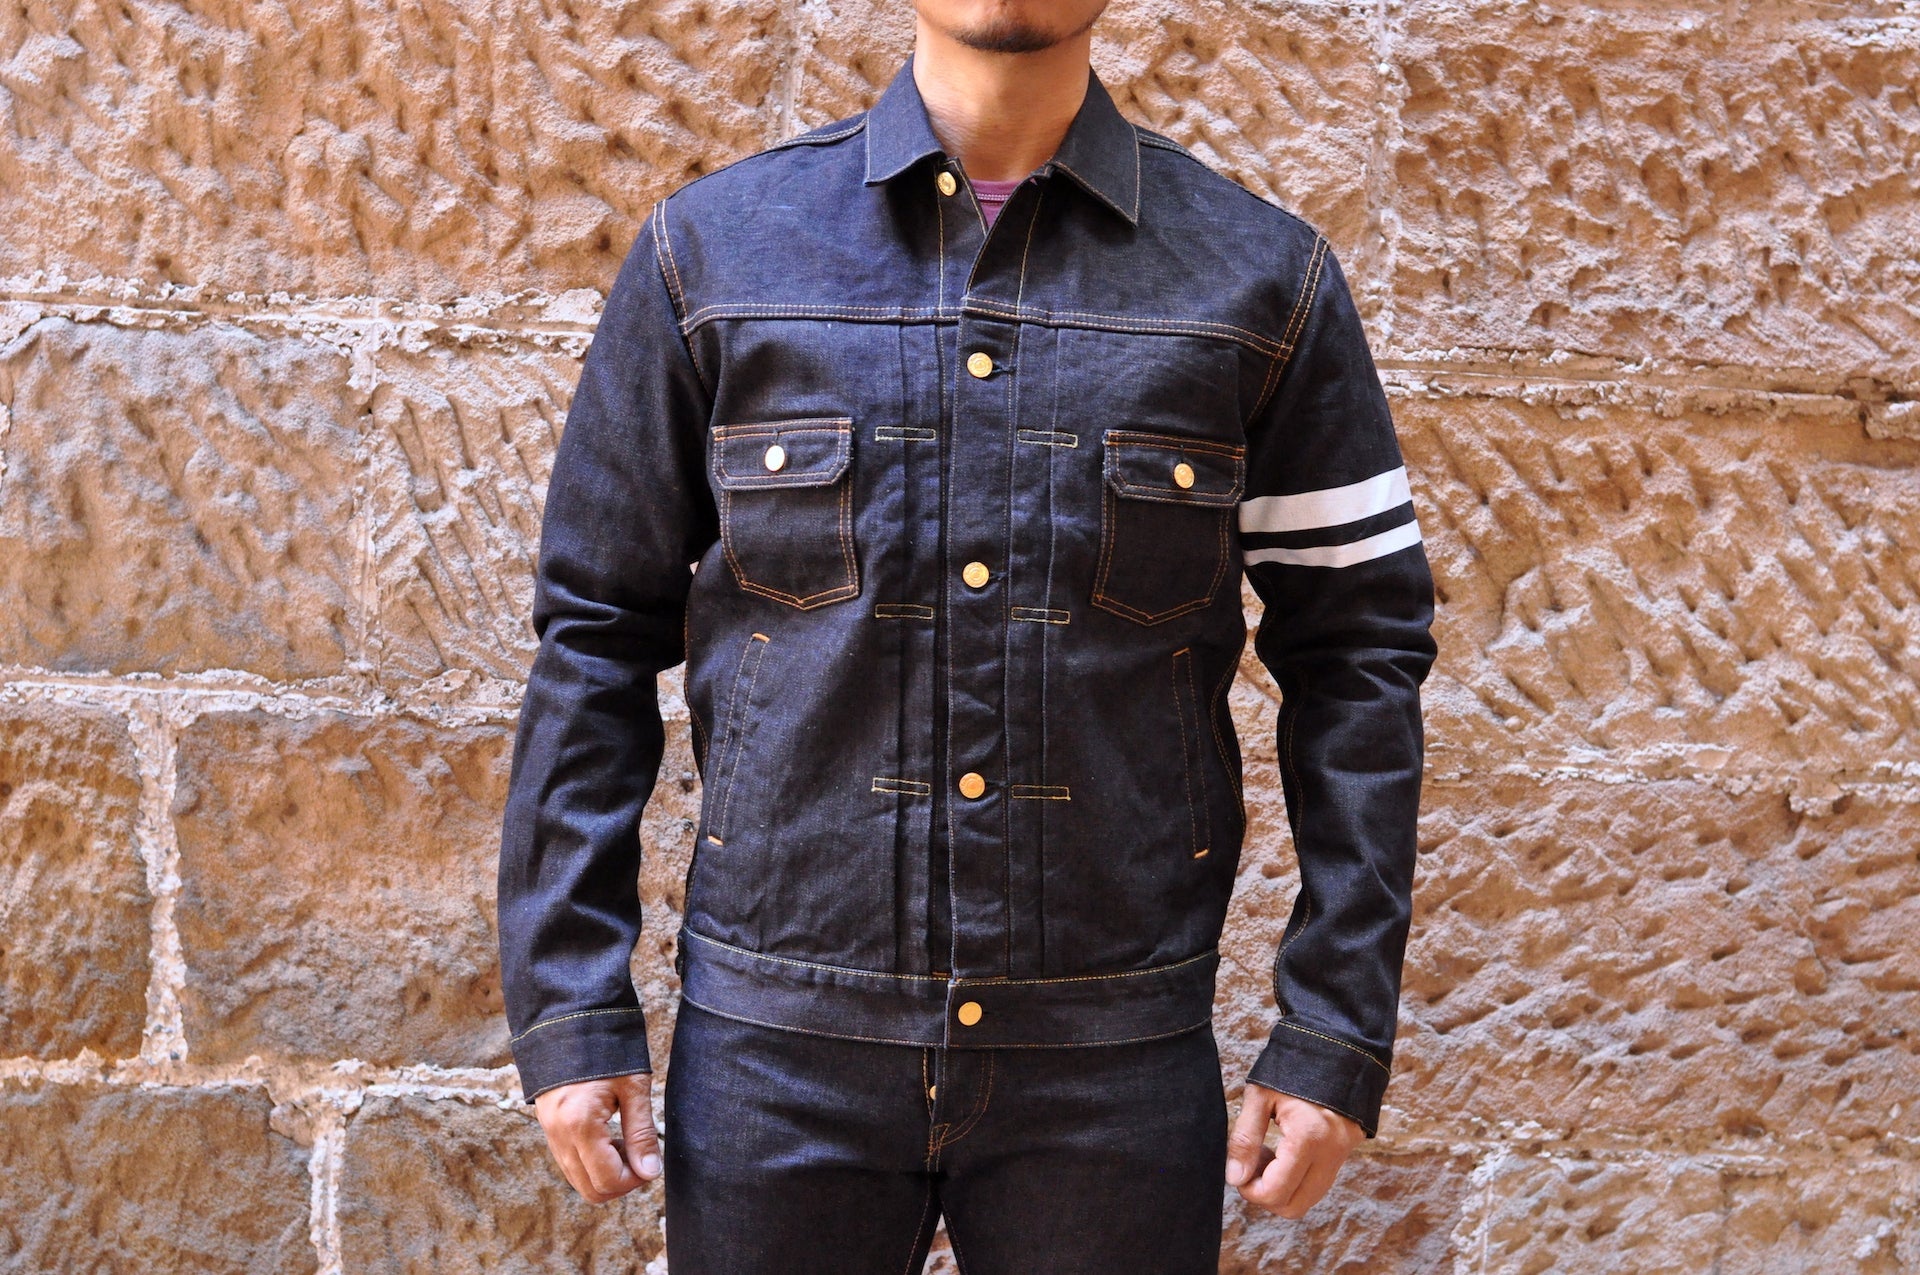 Buying Guide to Well-Made and Essential Raw Denim Jackets